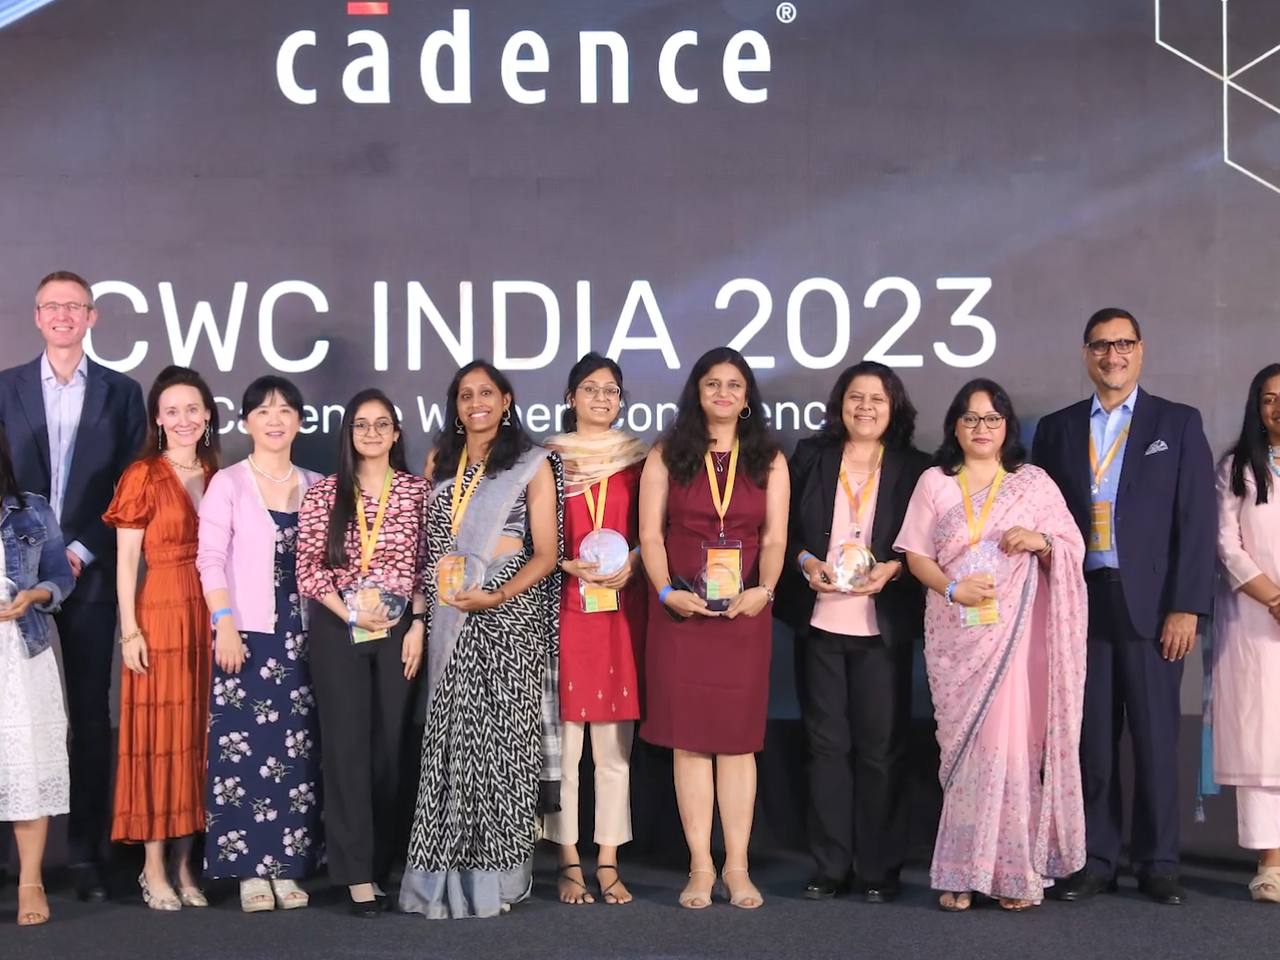 A group of people on a stage, many holding awards "CWC India 2023" behind them.